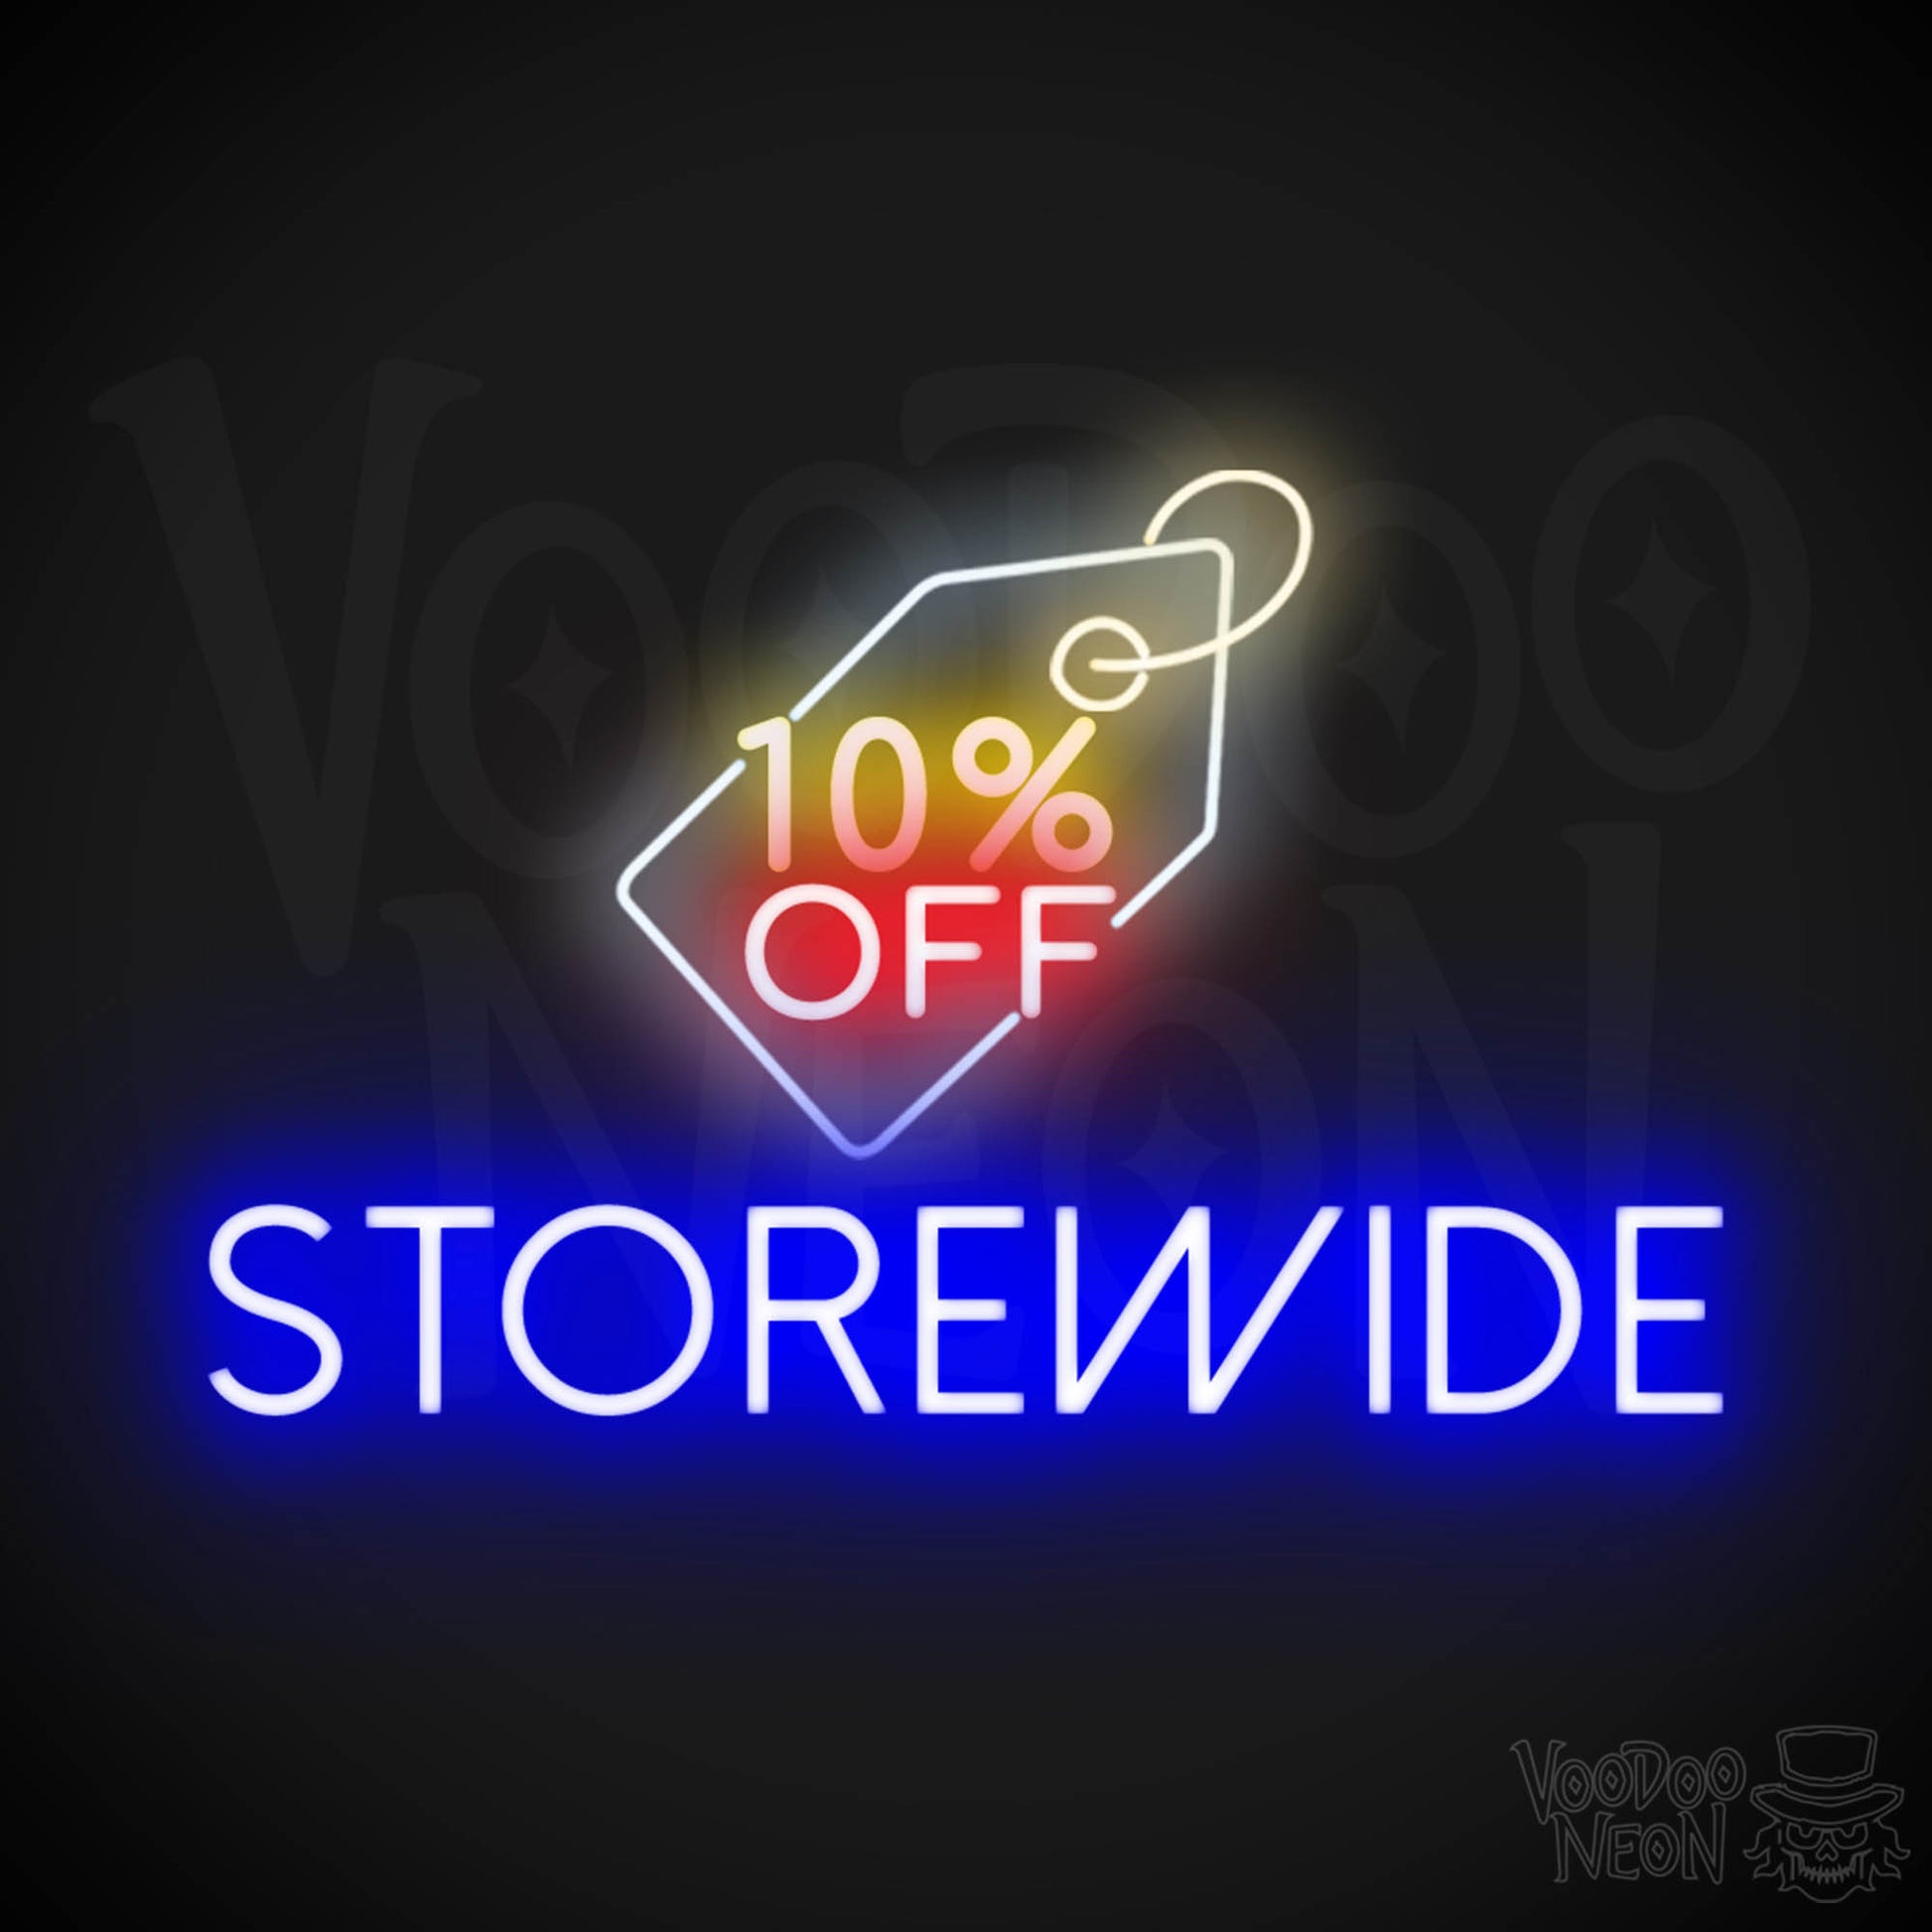 10% Off Storewide Neon Sign - 10% Off Storewide Sign - Neon Shop Signs - Color Multi-Color